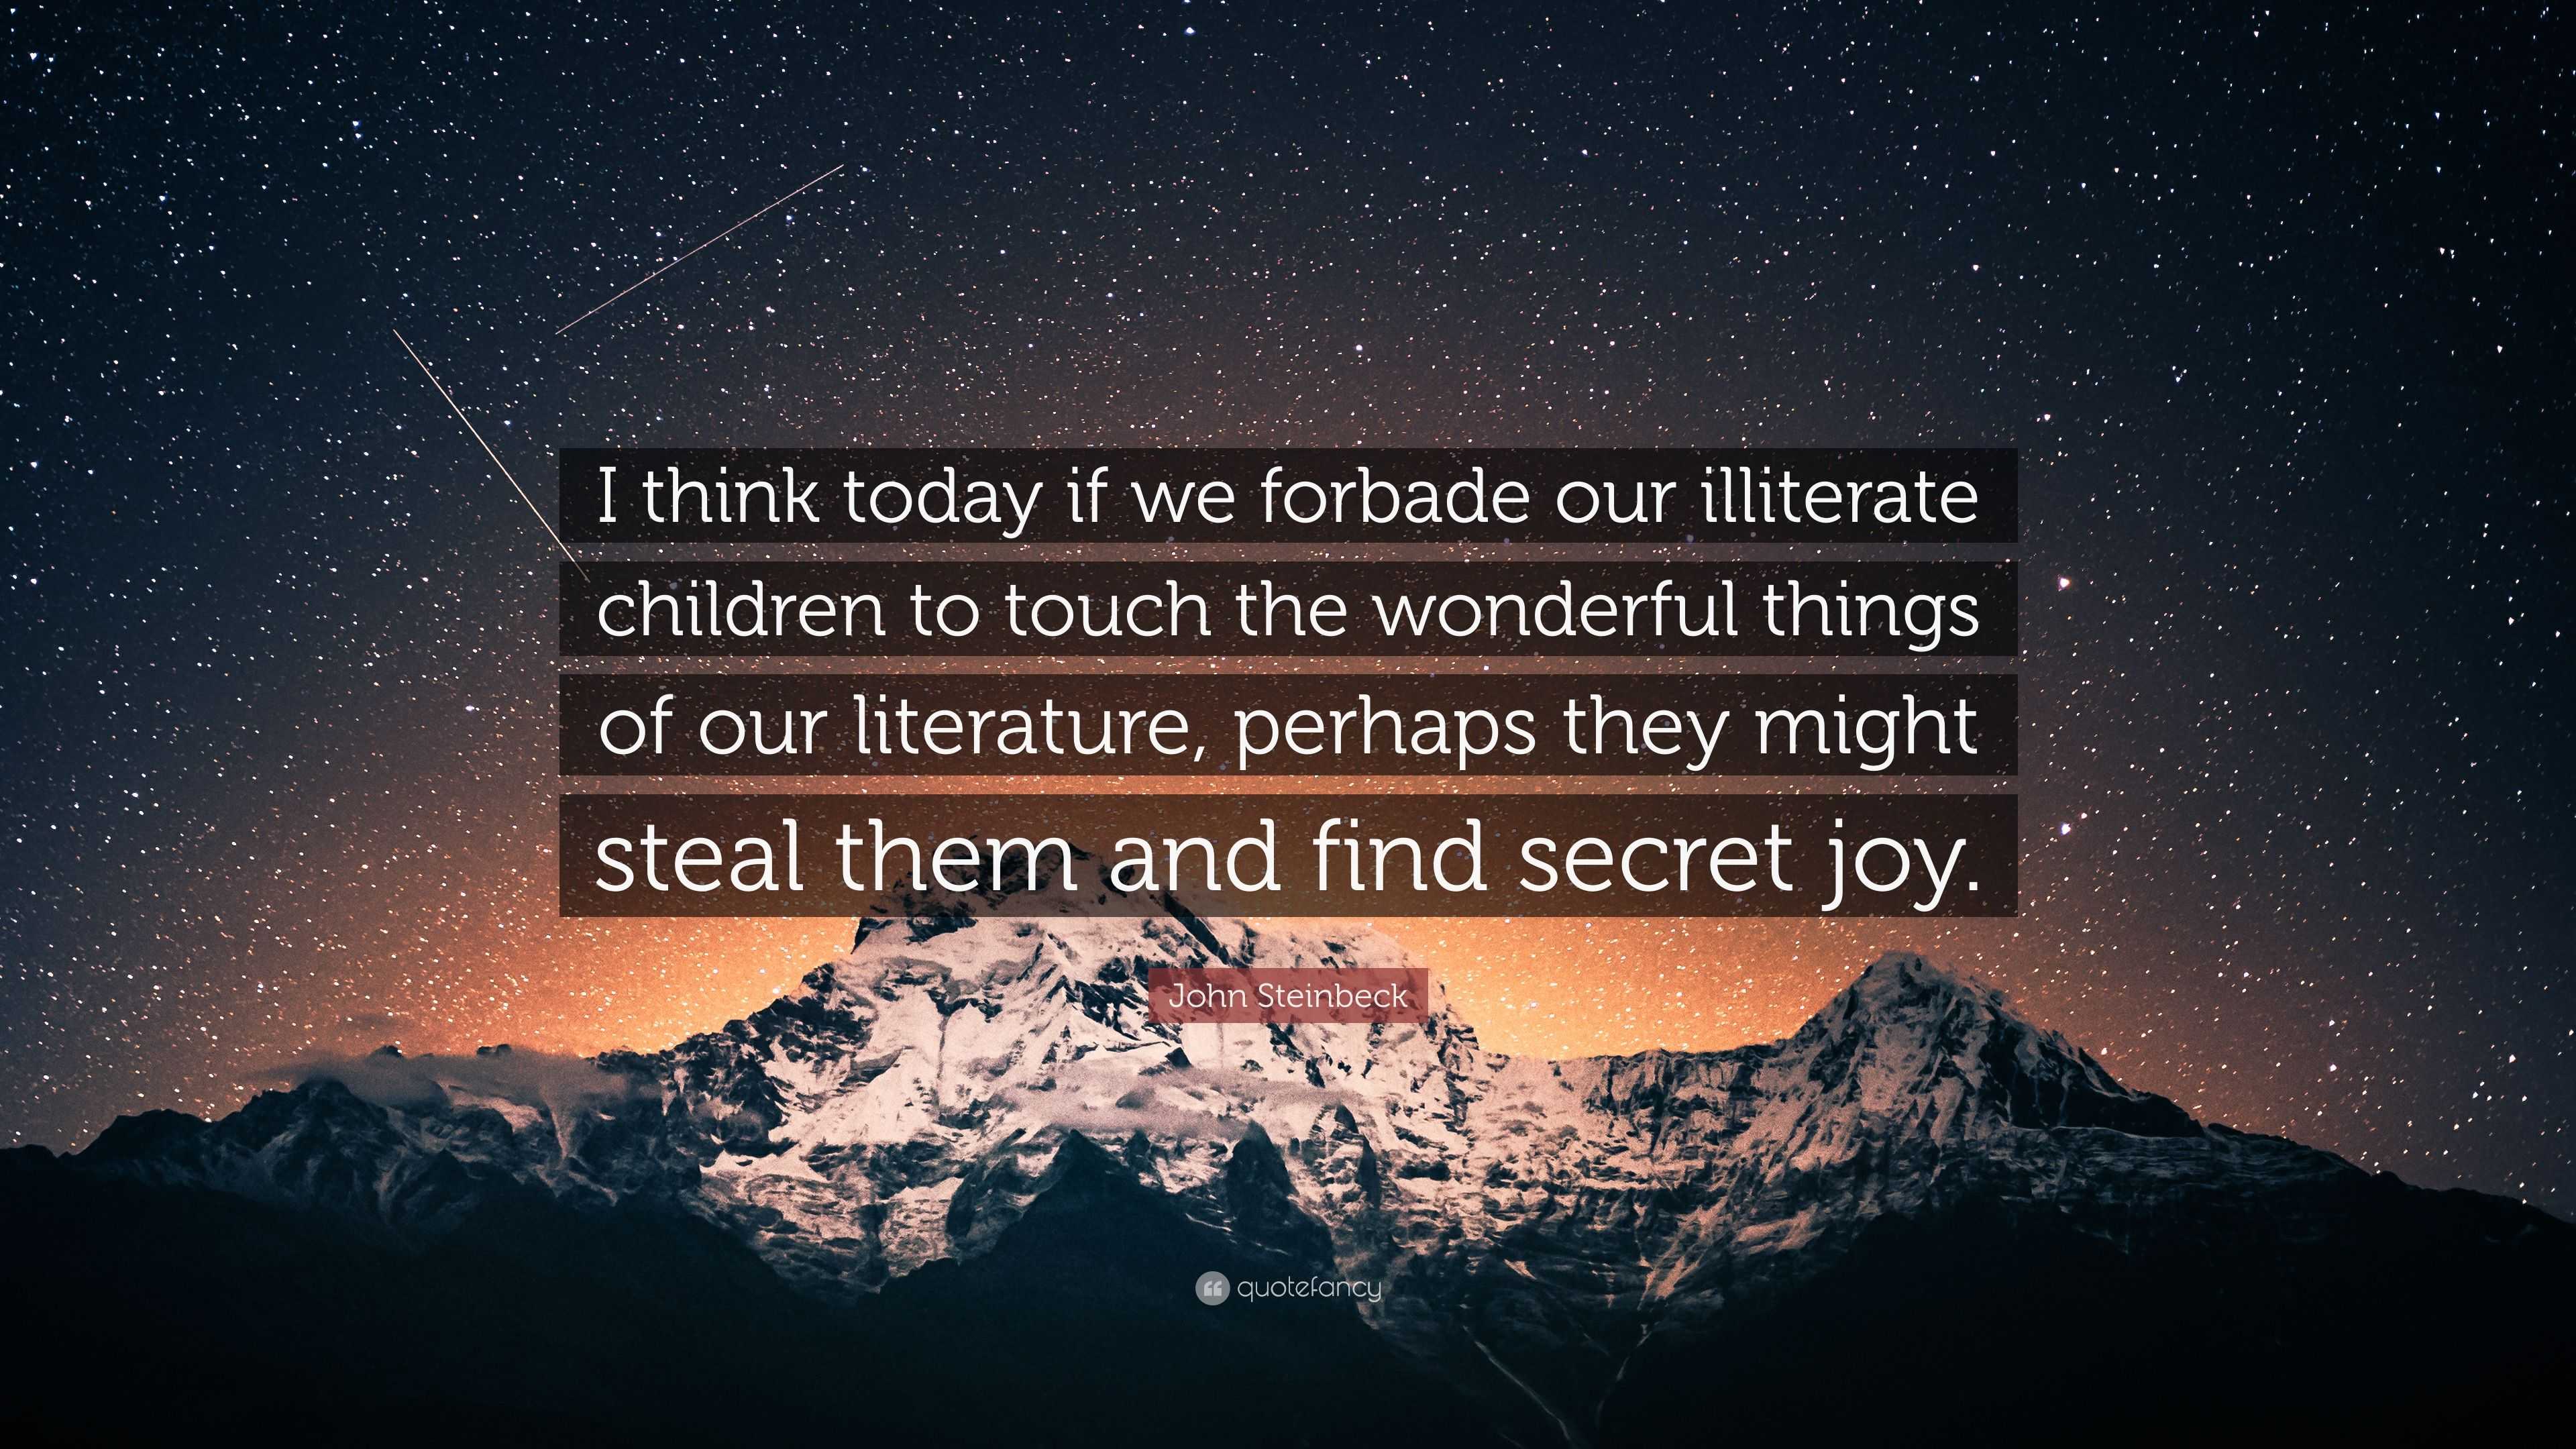 John Steinbeck Quote: “I think today if we forbade our illiterate children  to touch the wonderful things of our literature, perhaps they might ...”